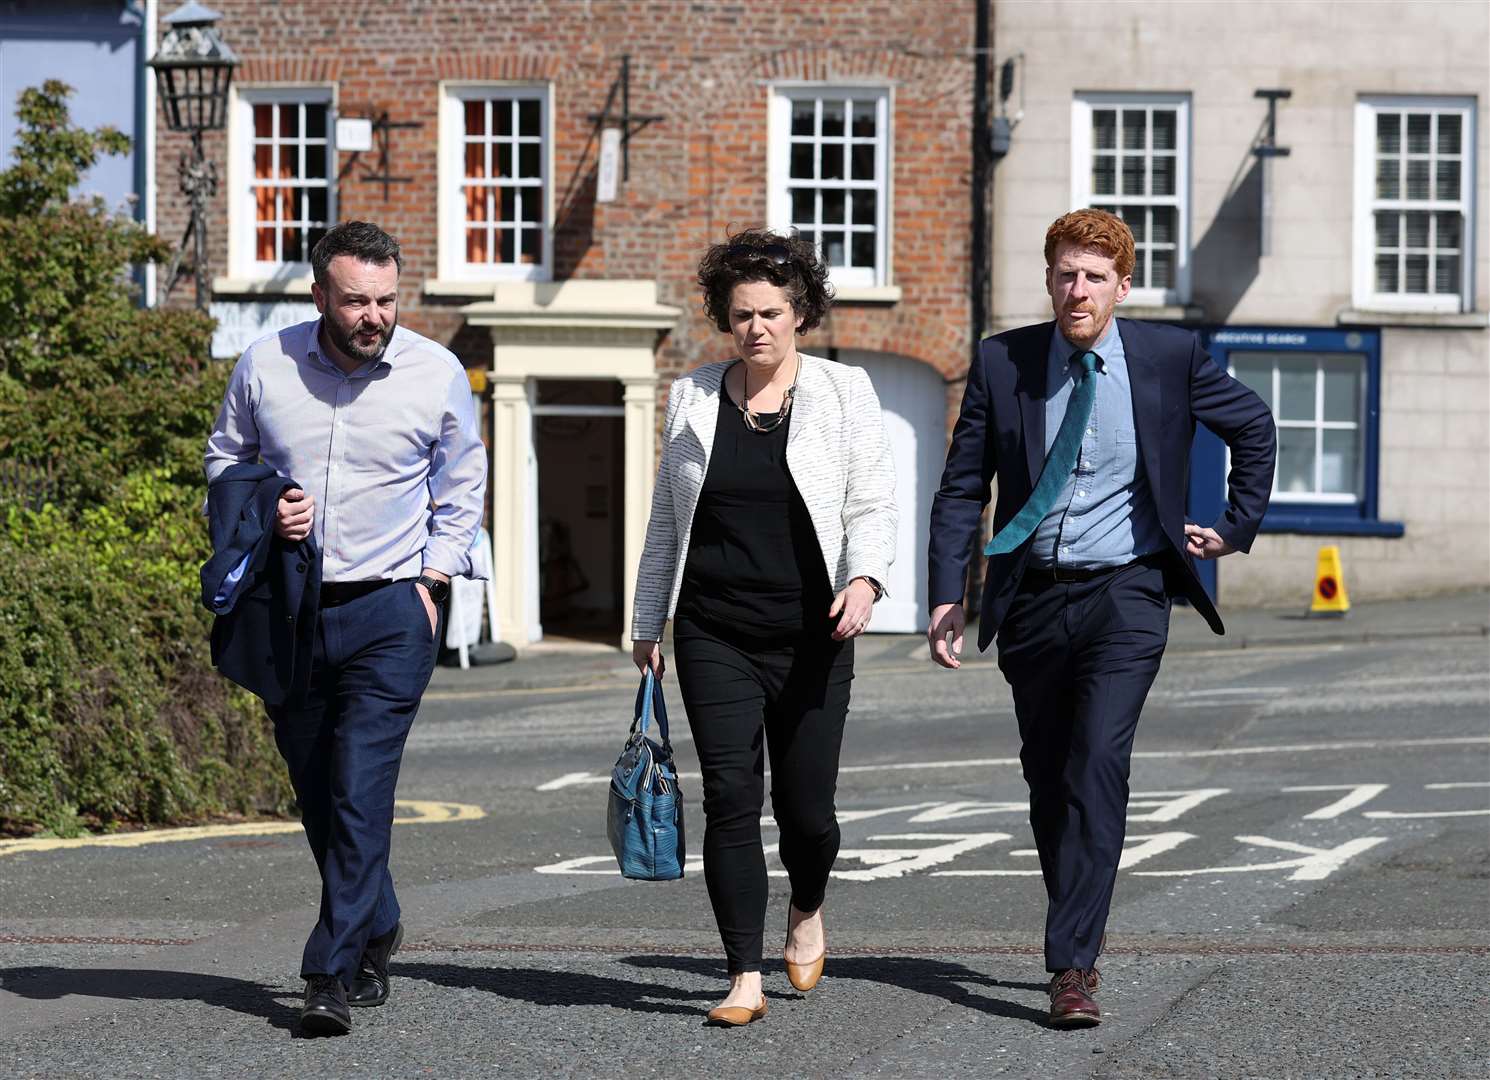 Members of the SDLP, (left to right) Colum Eastwood MP, Claire Hanna MP and Matthew O’Toole MLA arrive at Hillsborough Castle (Liam McBurney/PA)